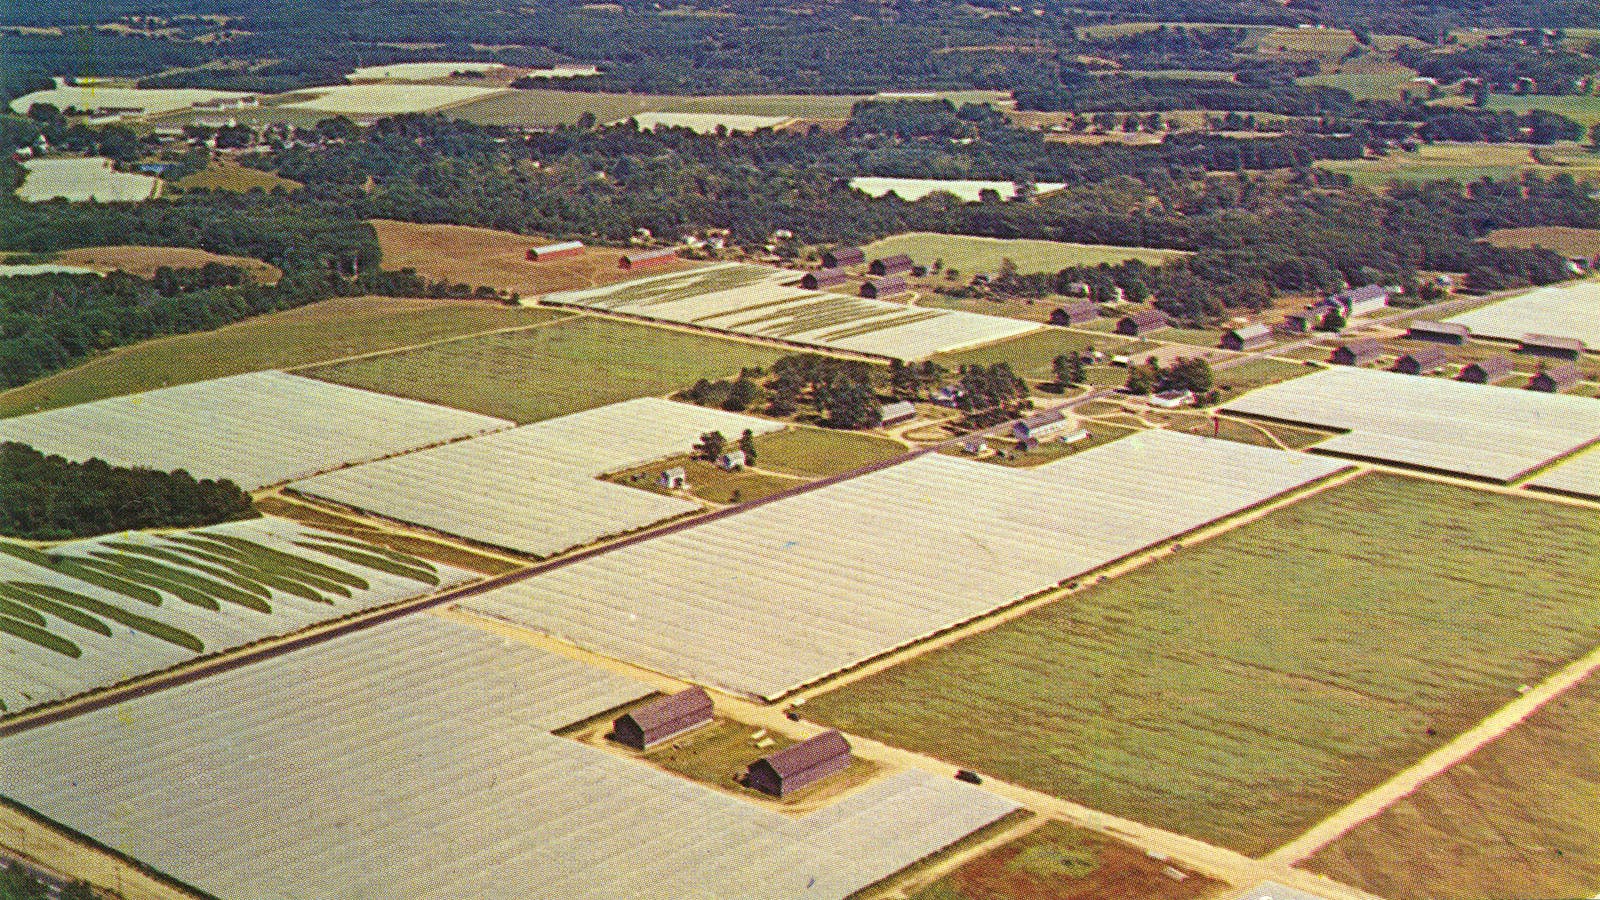 An aerial view from the 1960s showing the expansive shade field tents in the Connecticut River Valley. Around 81,500 acres of shade tobacco was grown in the Valley during that time.